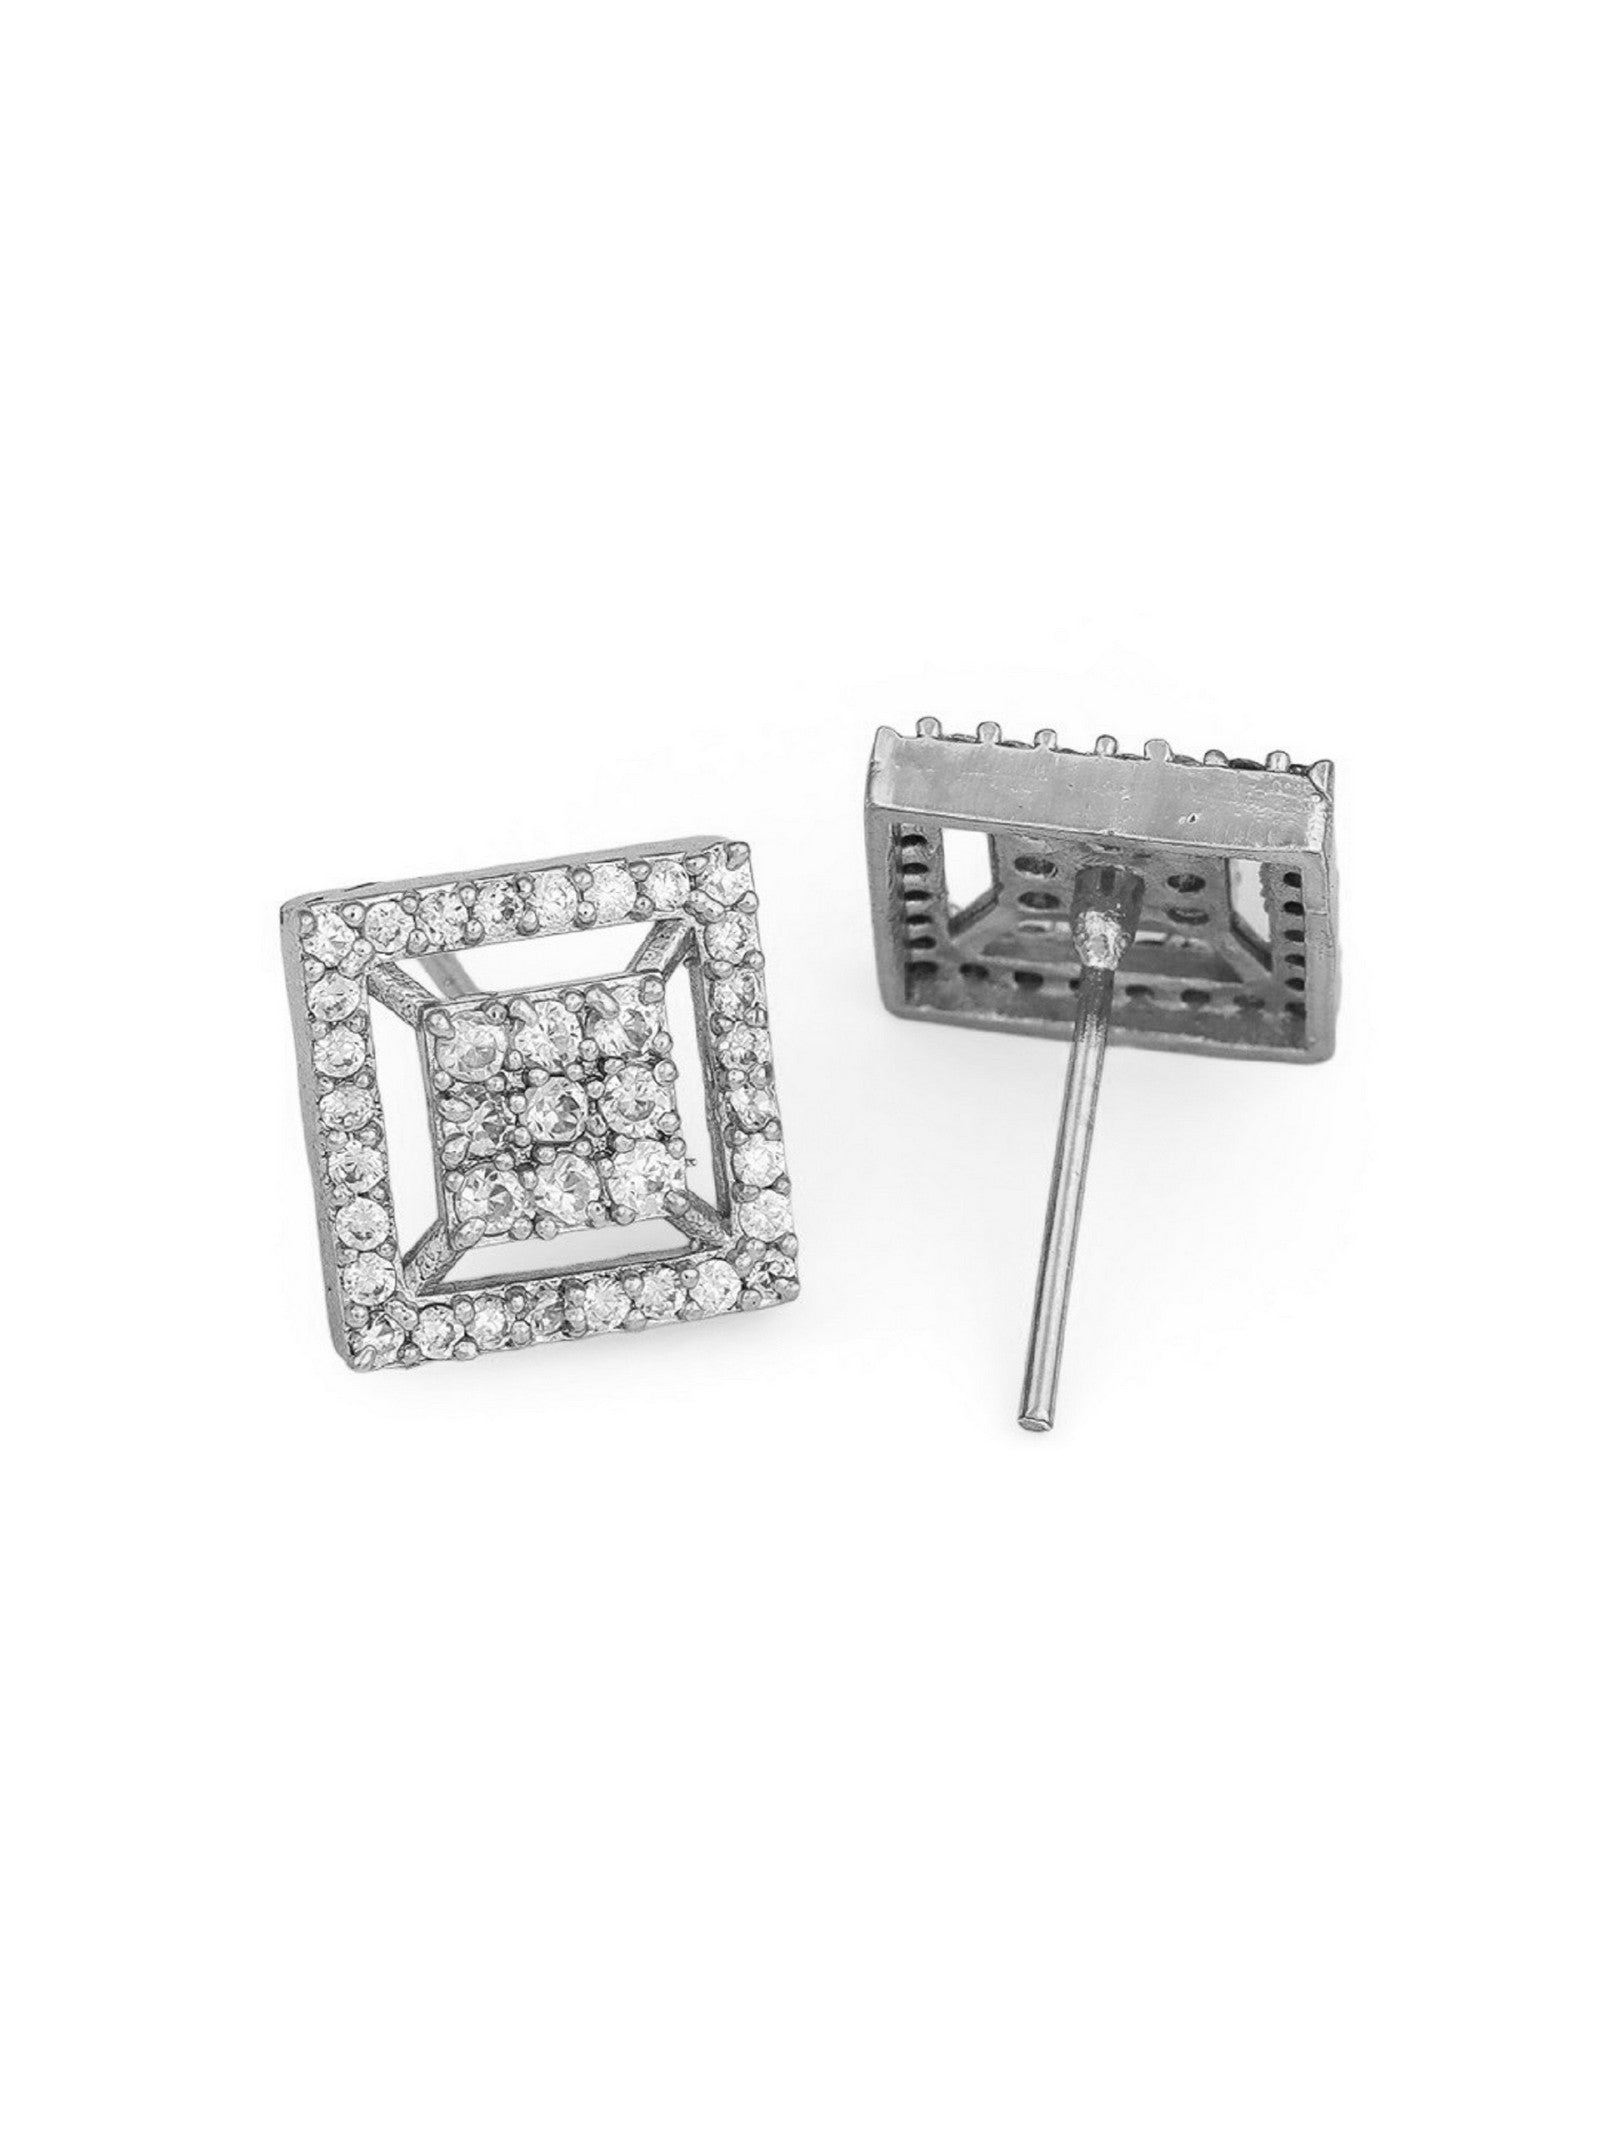 Silver Plated Square Shape Earring With Studed AD Diamond